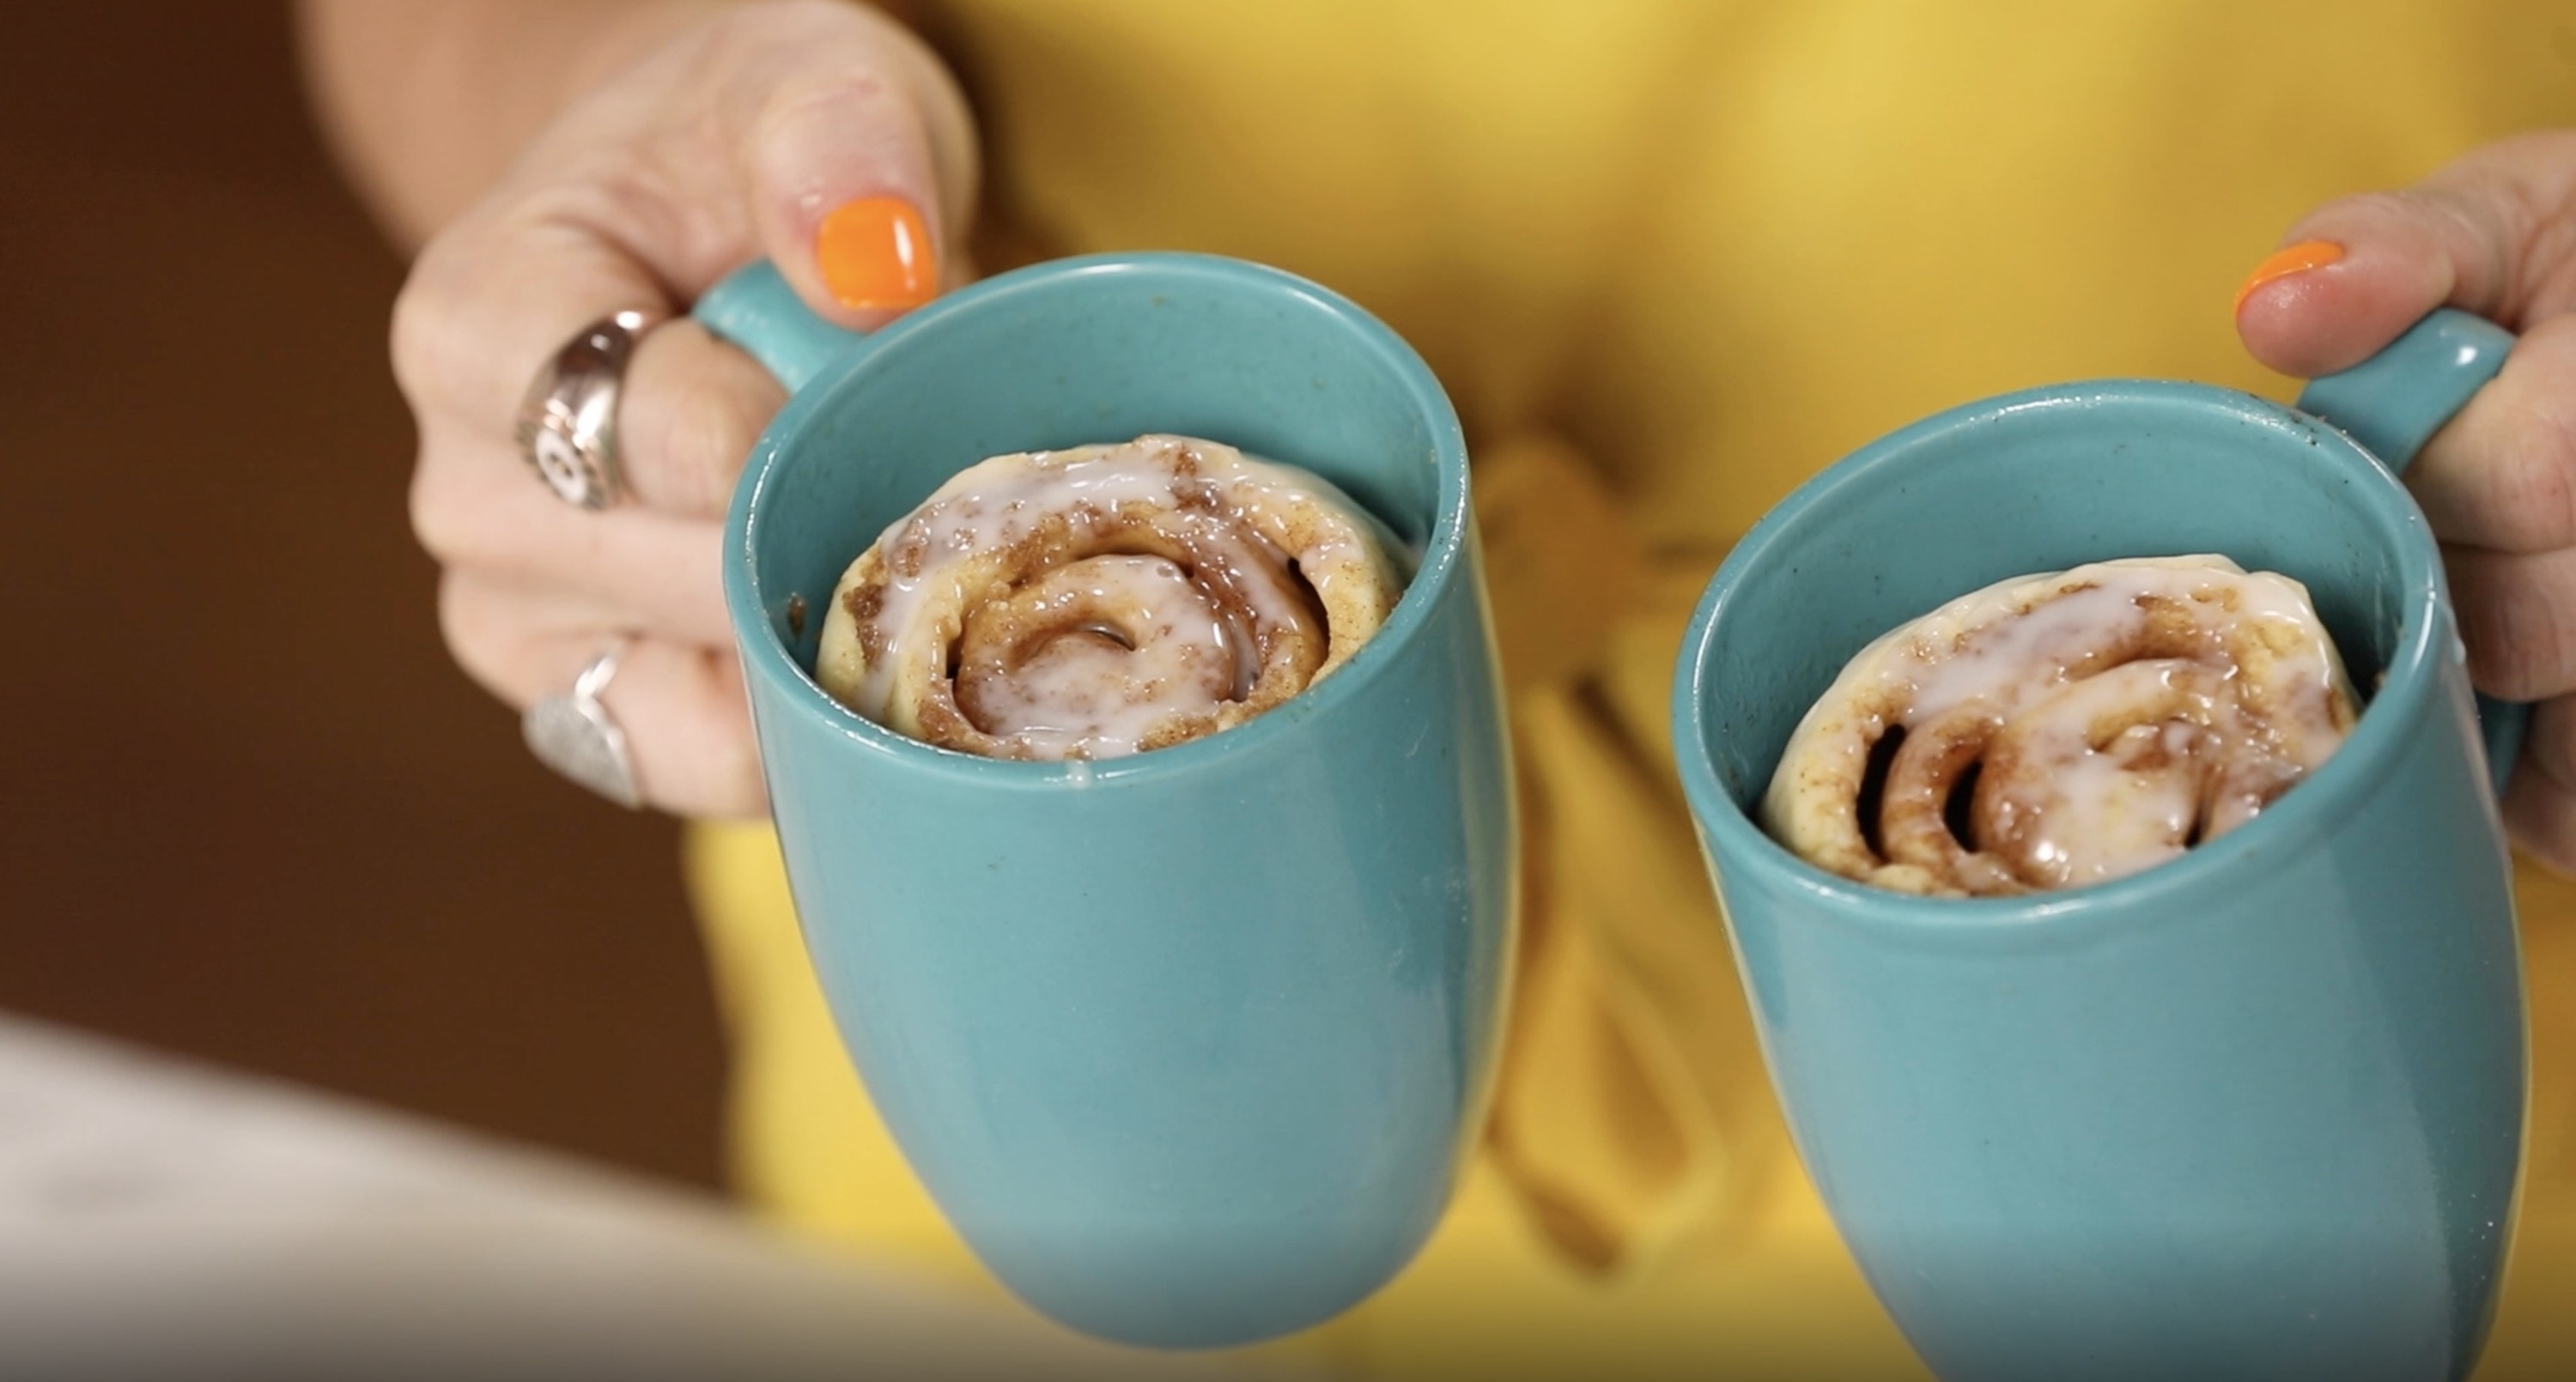 12 Foolproof Mug Desserts That Are As Easy As They Are Delicious